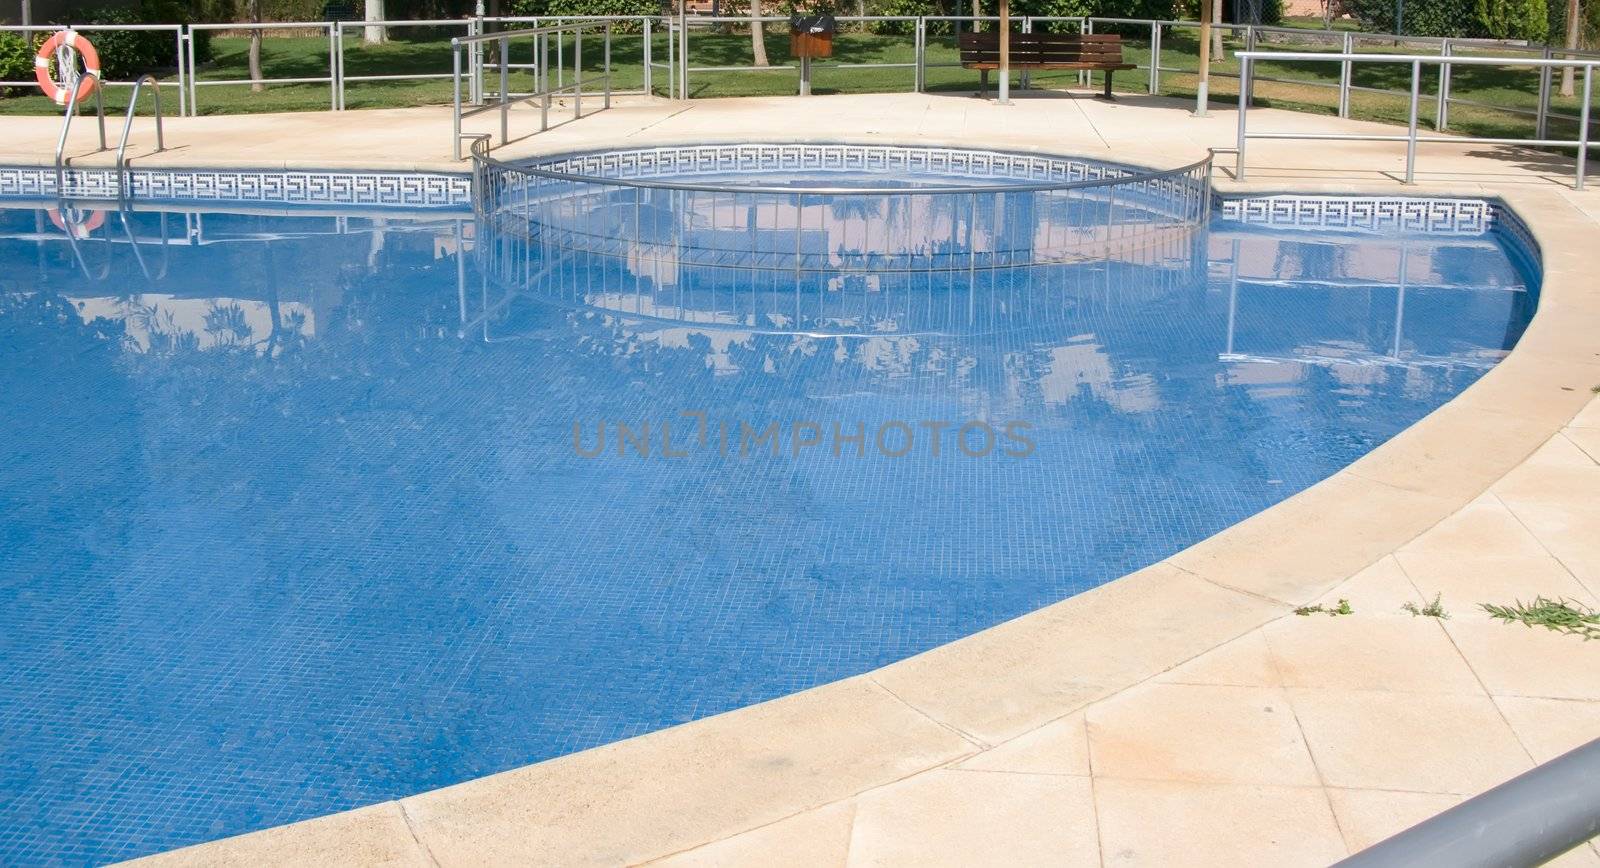  swimming pool invite to relax in the summer 